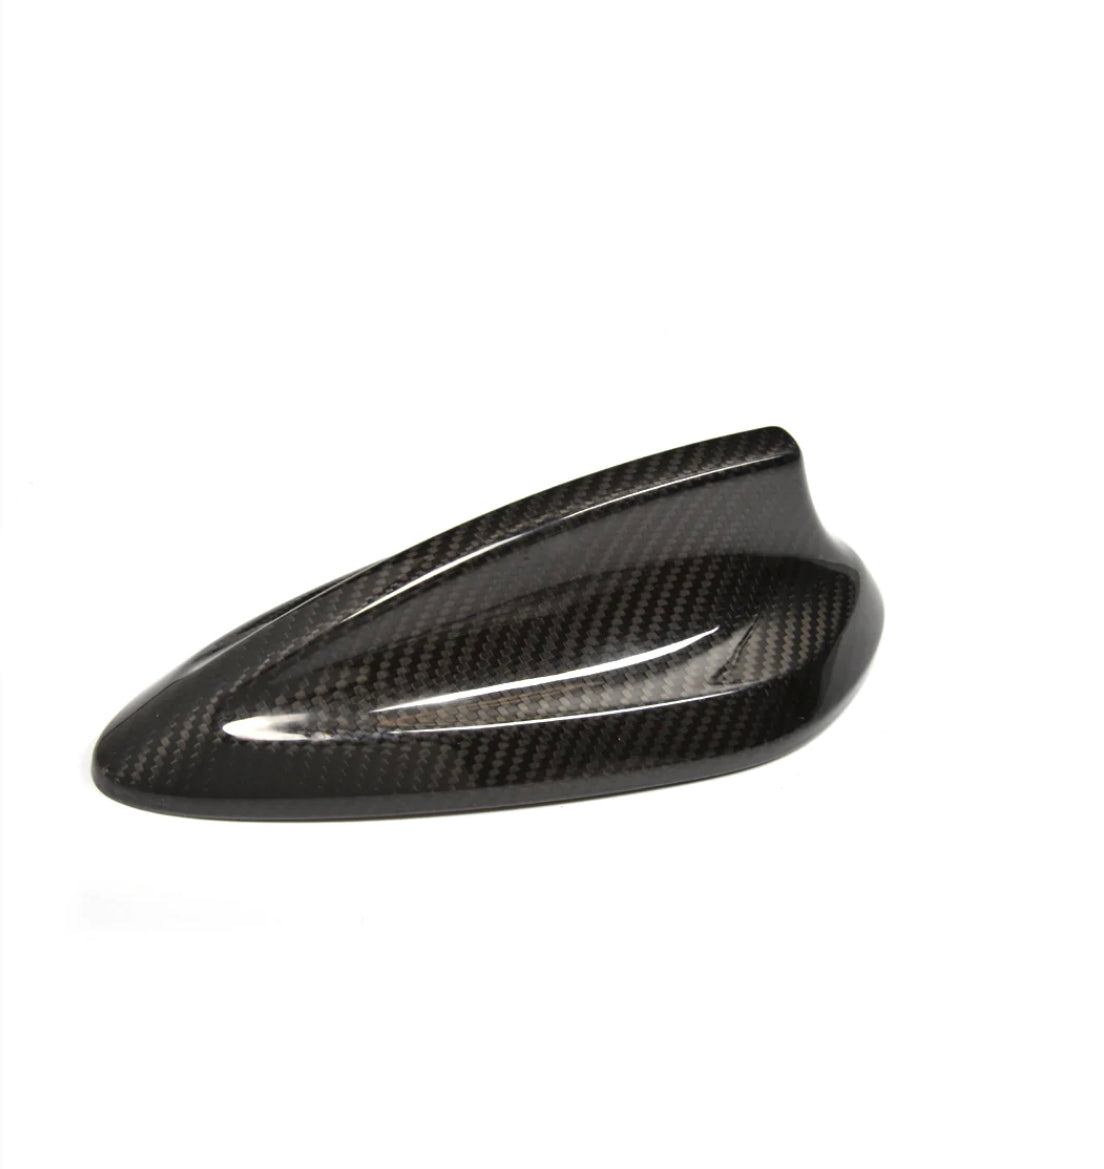 BMW F Modell Antenna Cover in Carbon